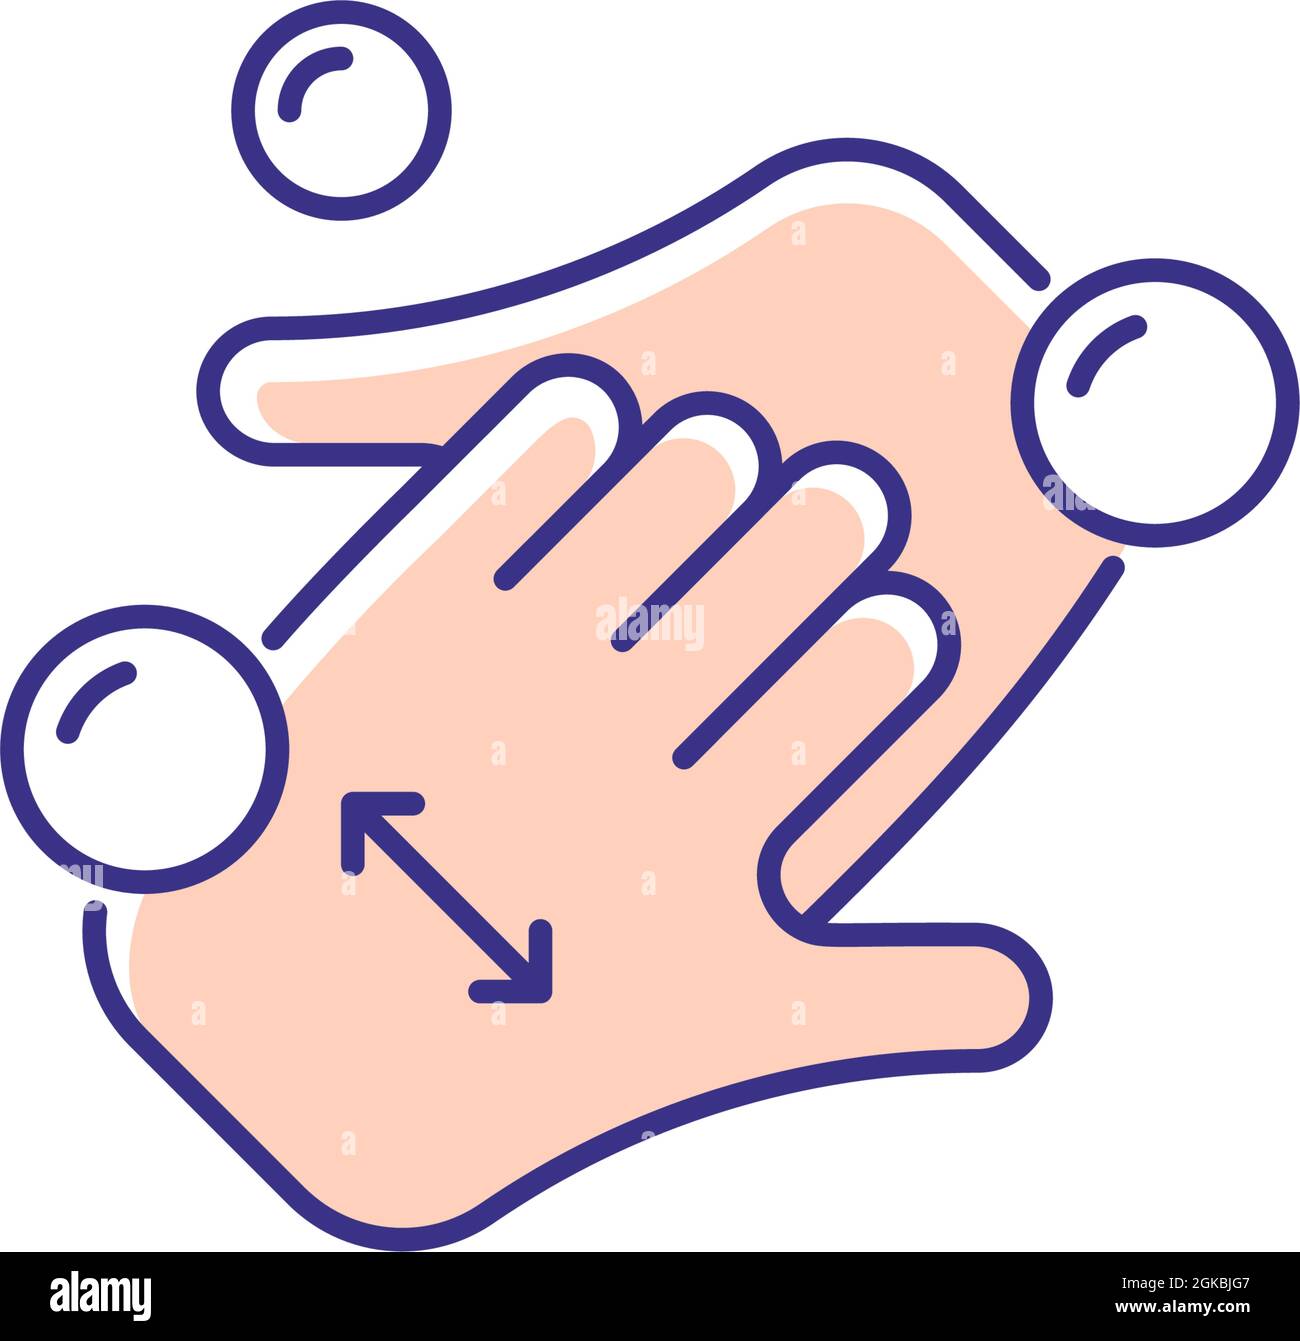 Cup fingers RGB color icon Stock Vector